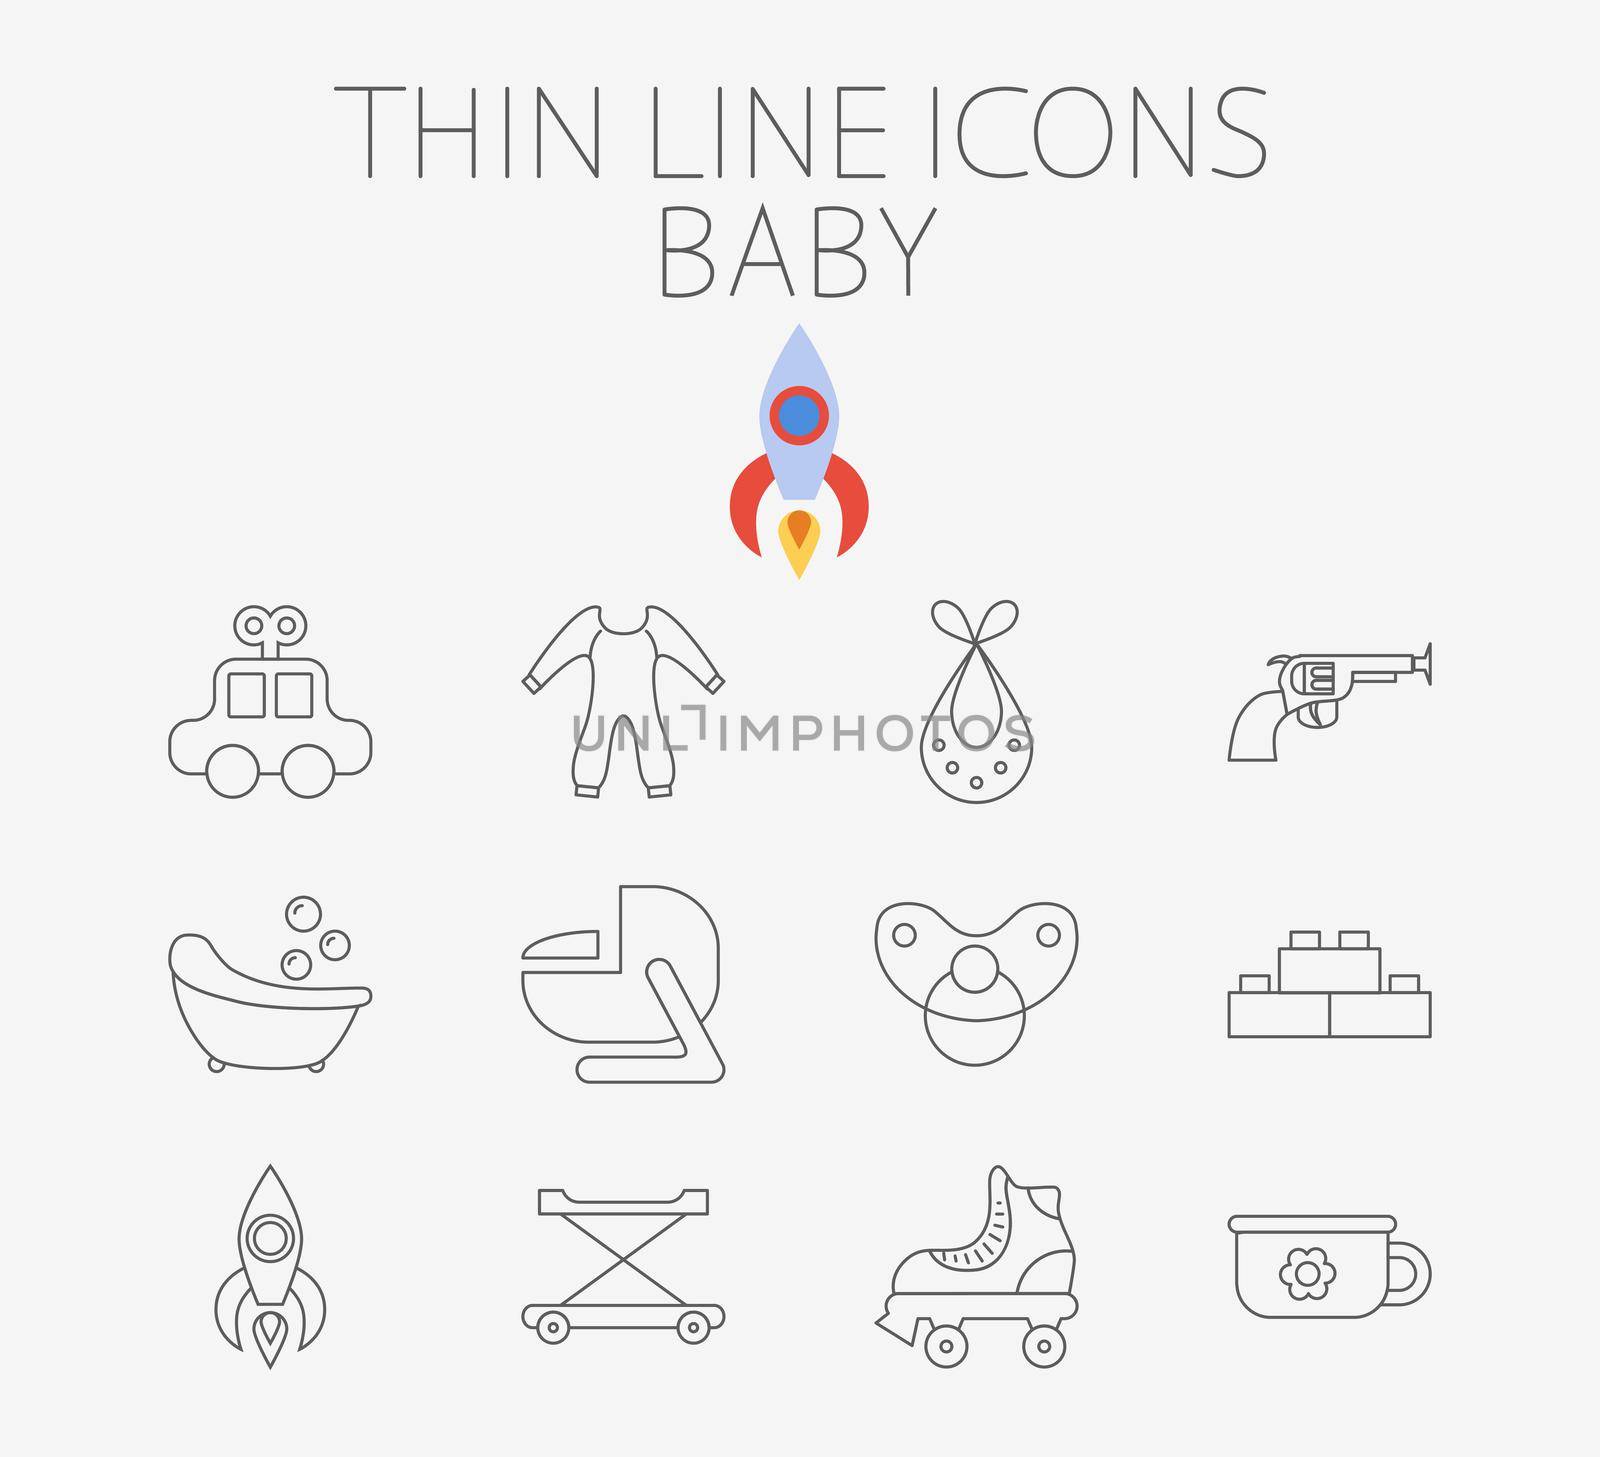 Baby thin line icon set for web and mobile applications. Set includes - car, bib, blocks, potty, roller skate, gun, bath, car seat, nipple, rocket, baby walker. Pictogram, infographic element.